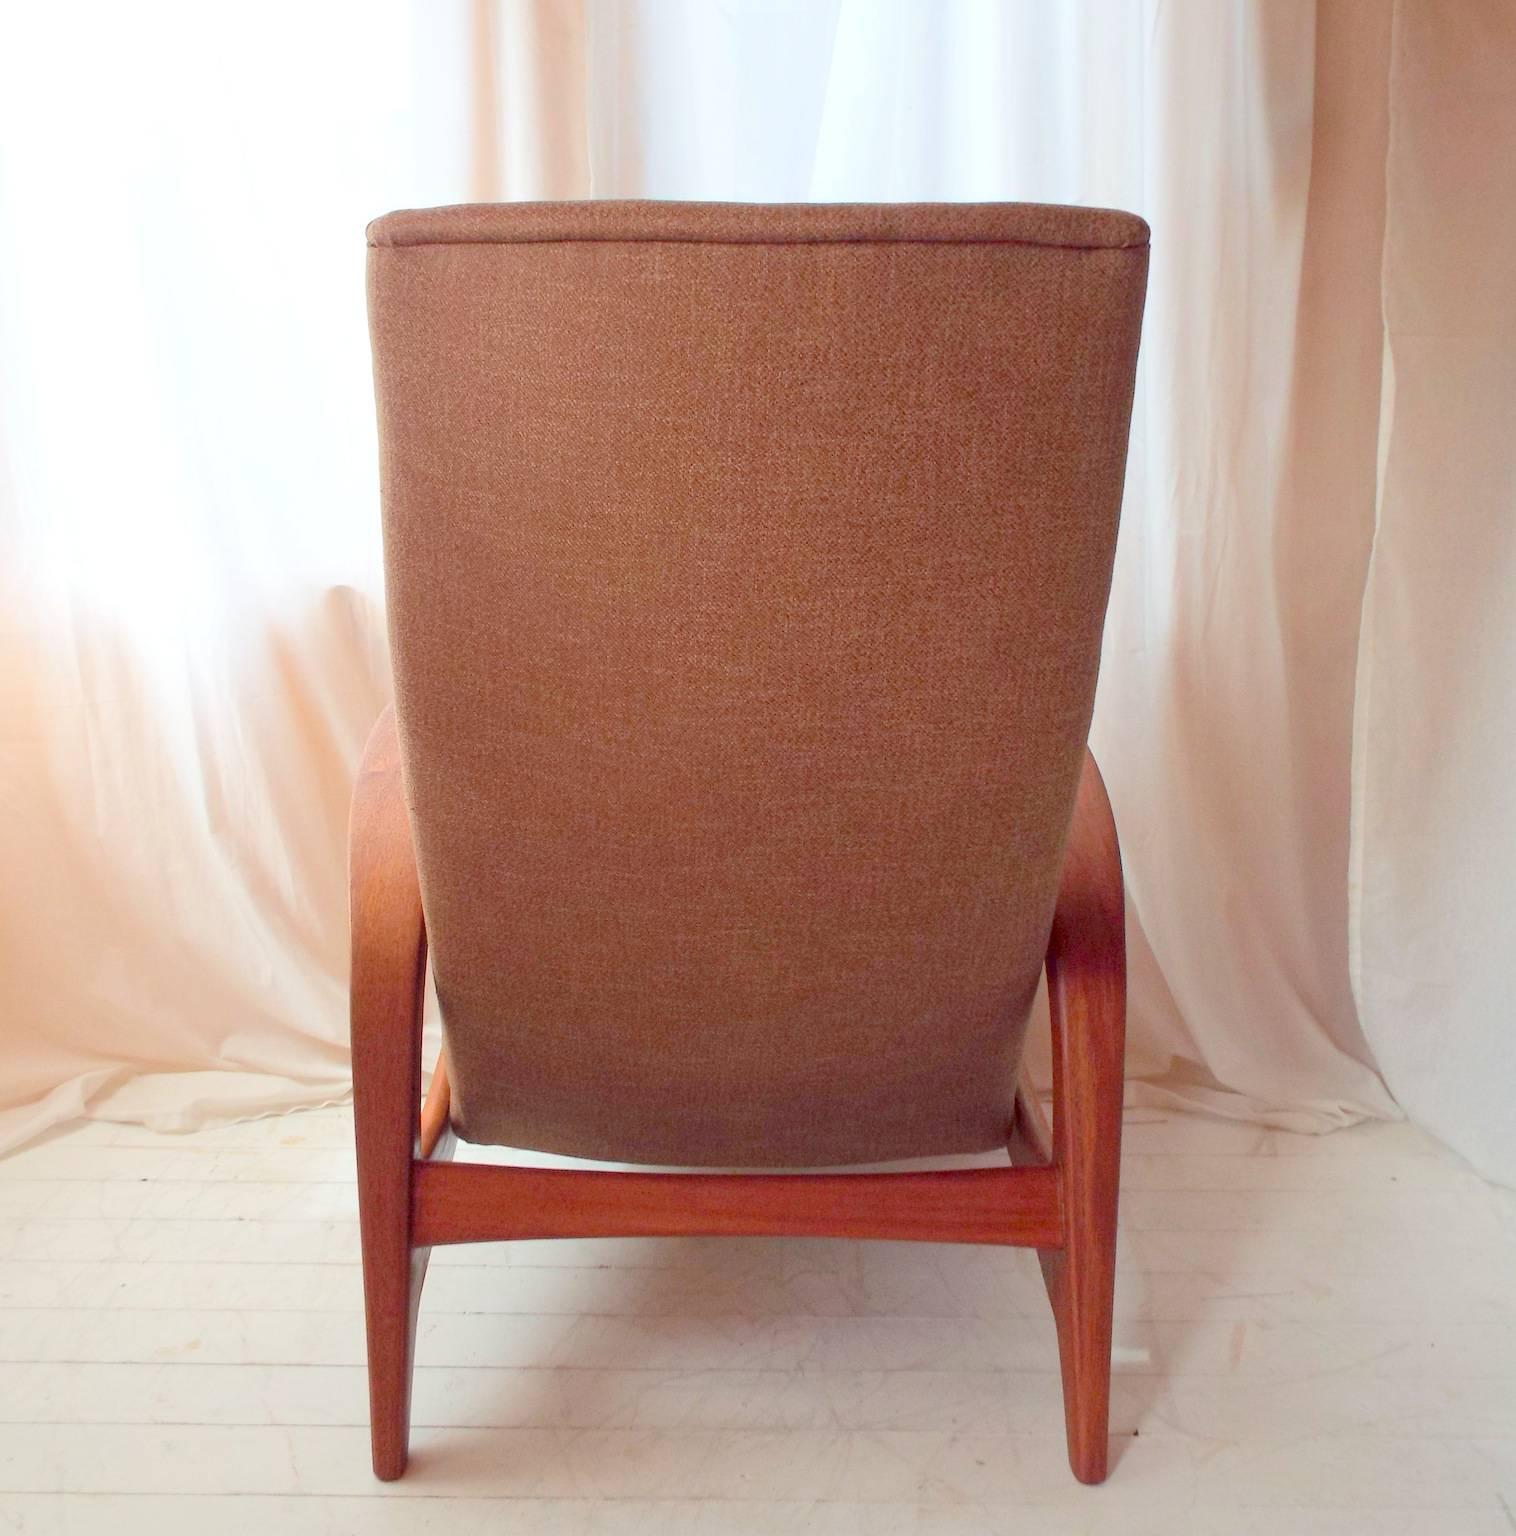 1960s Gimson & Slater Rock'n'rest Lounge Chair with Original Twill Upholstery For Sale 1